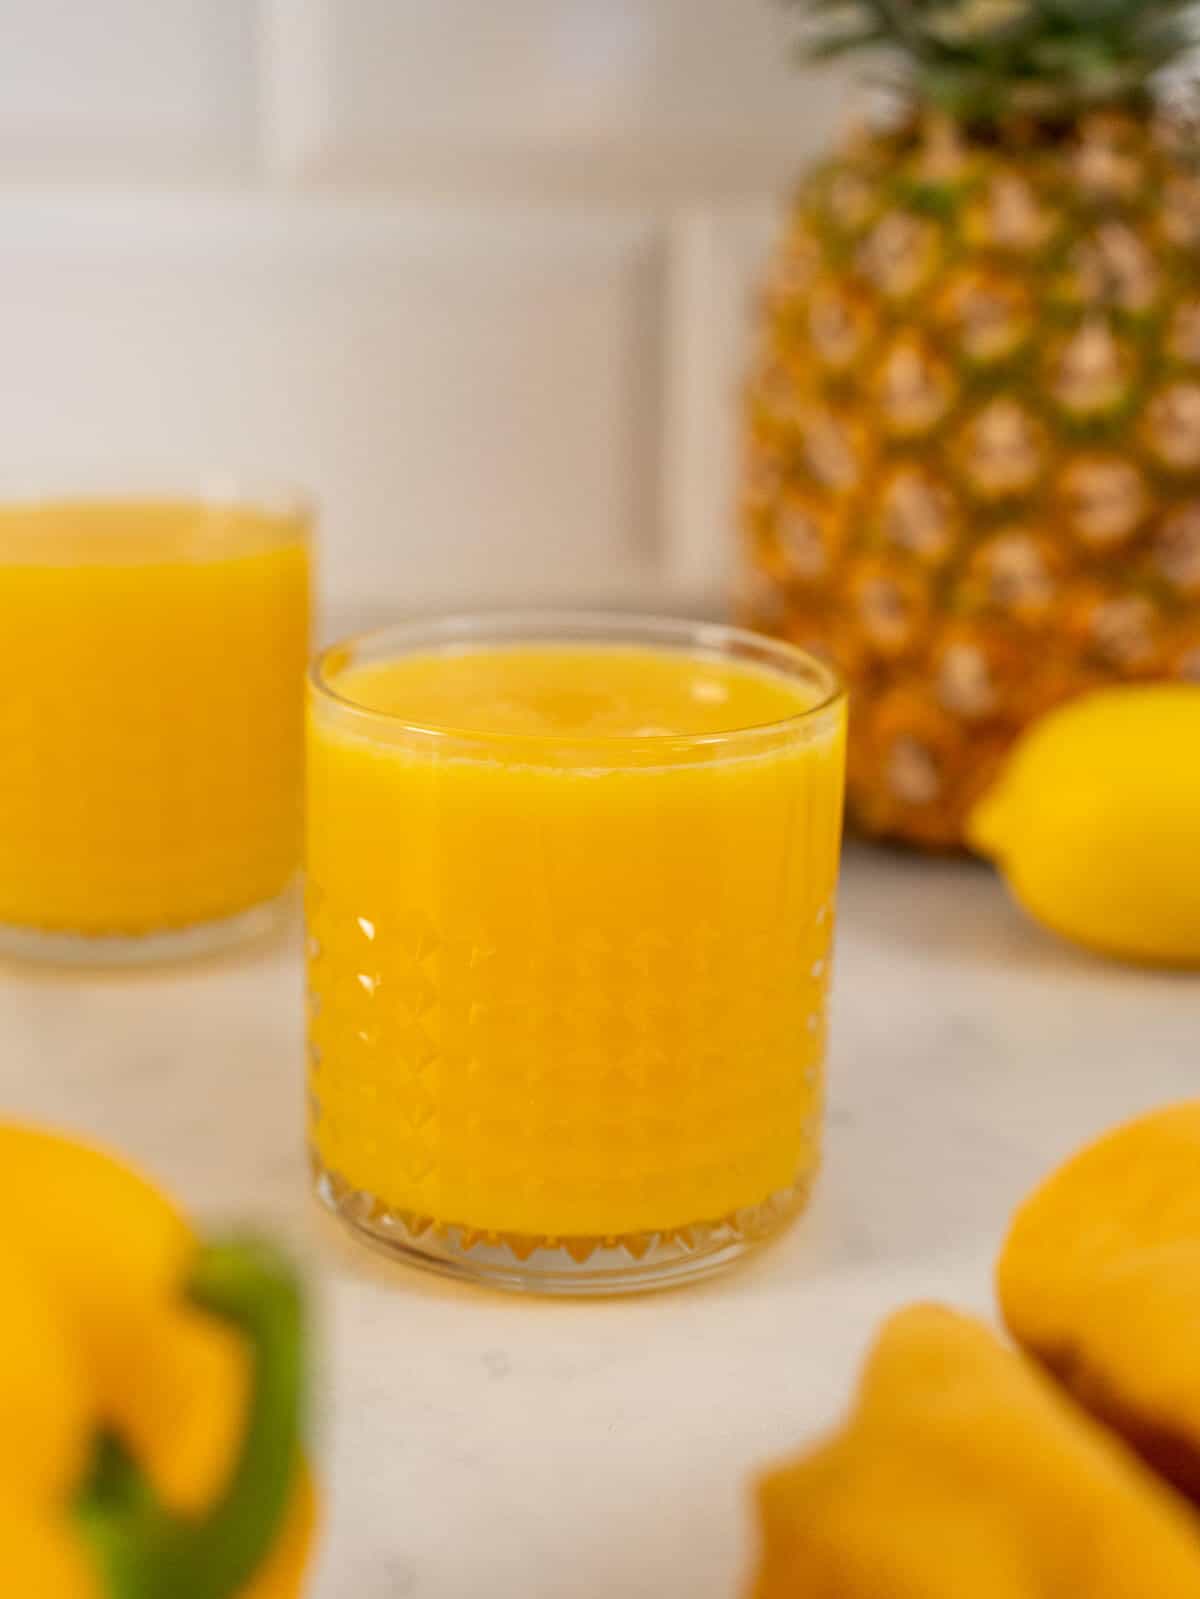 Golden Pineapple and Ginger juice glasses served with fruit on the background.